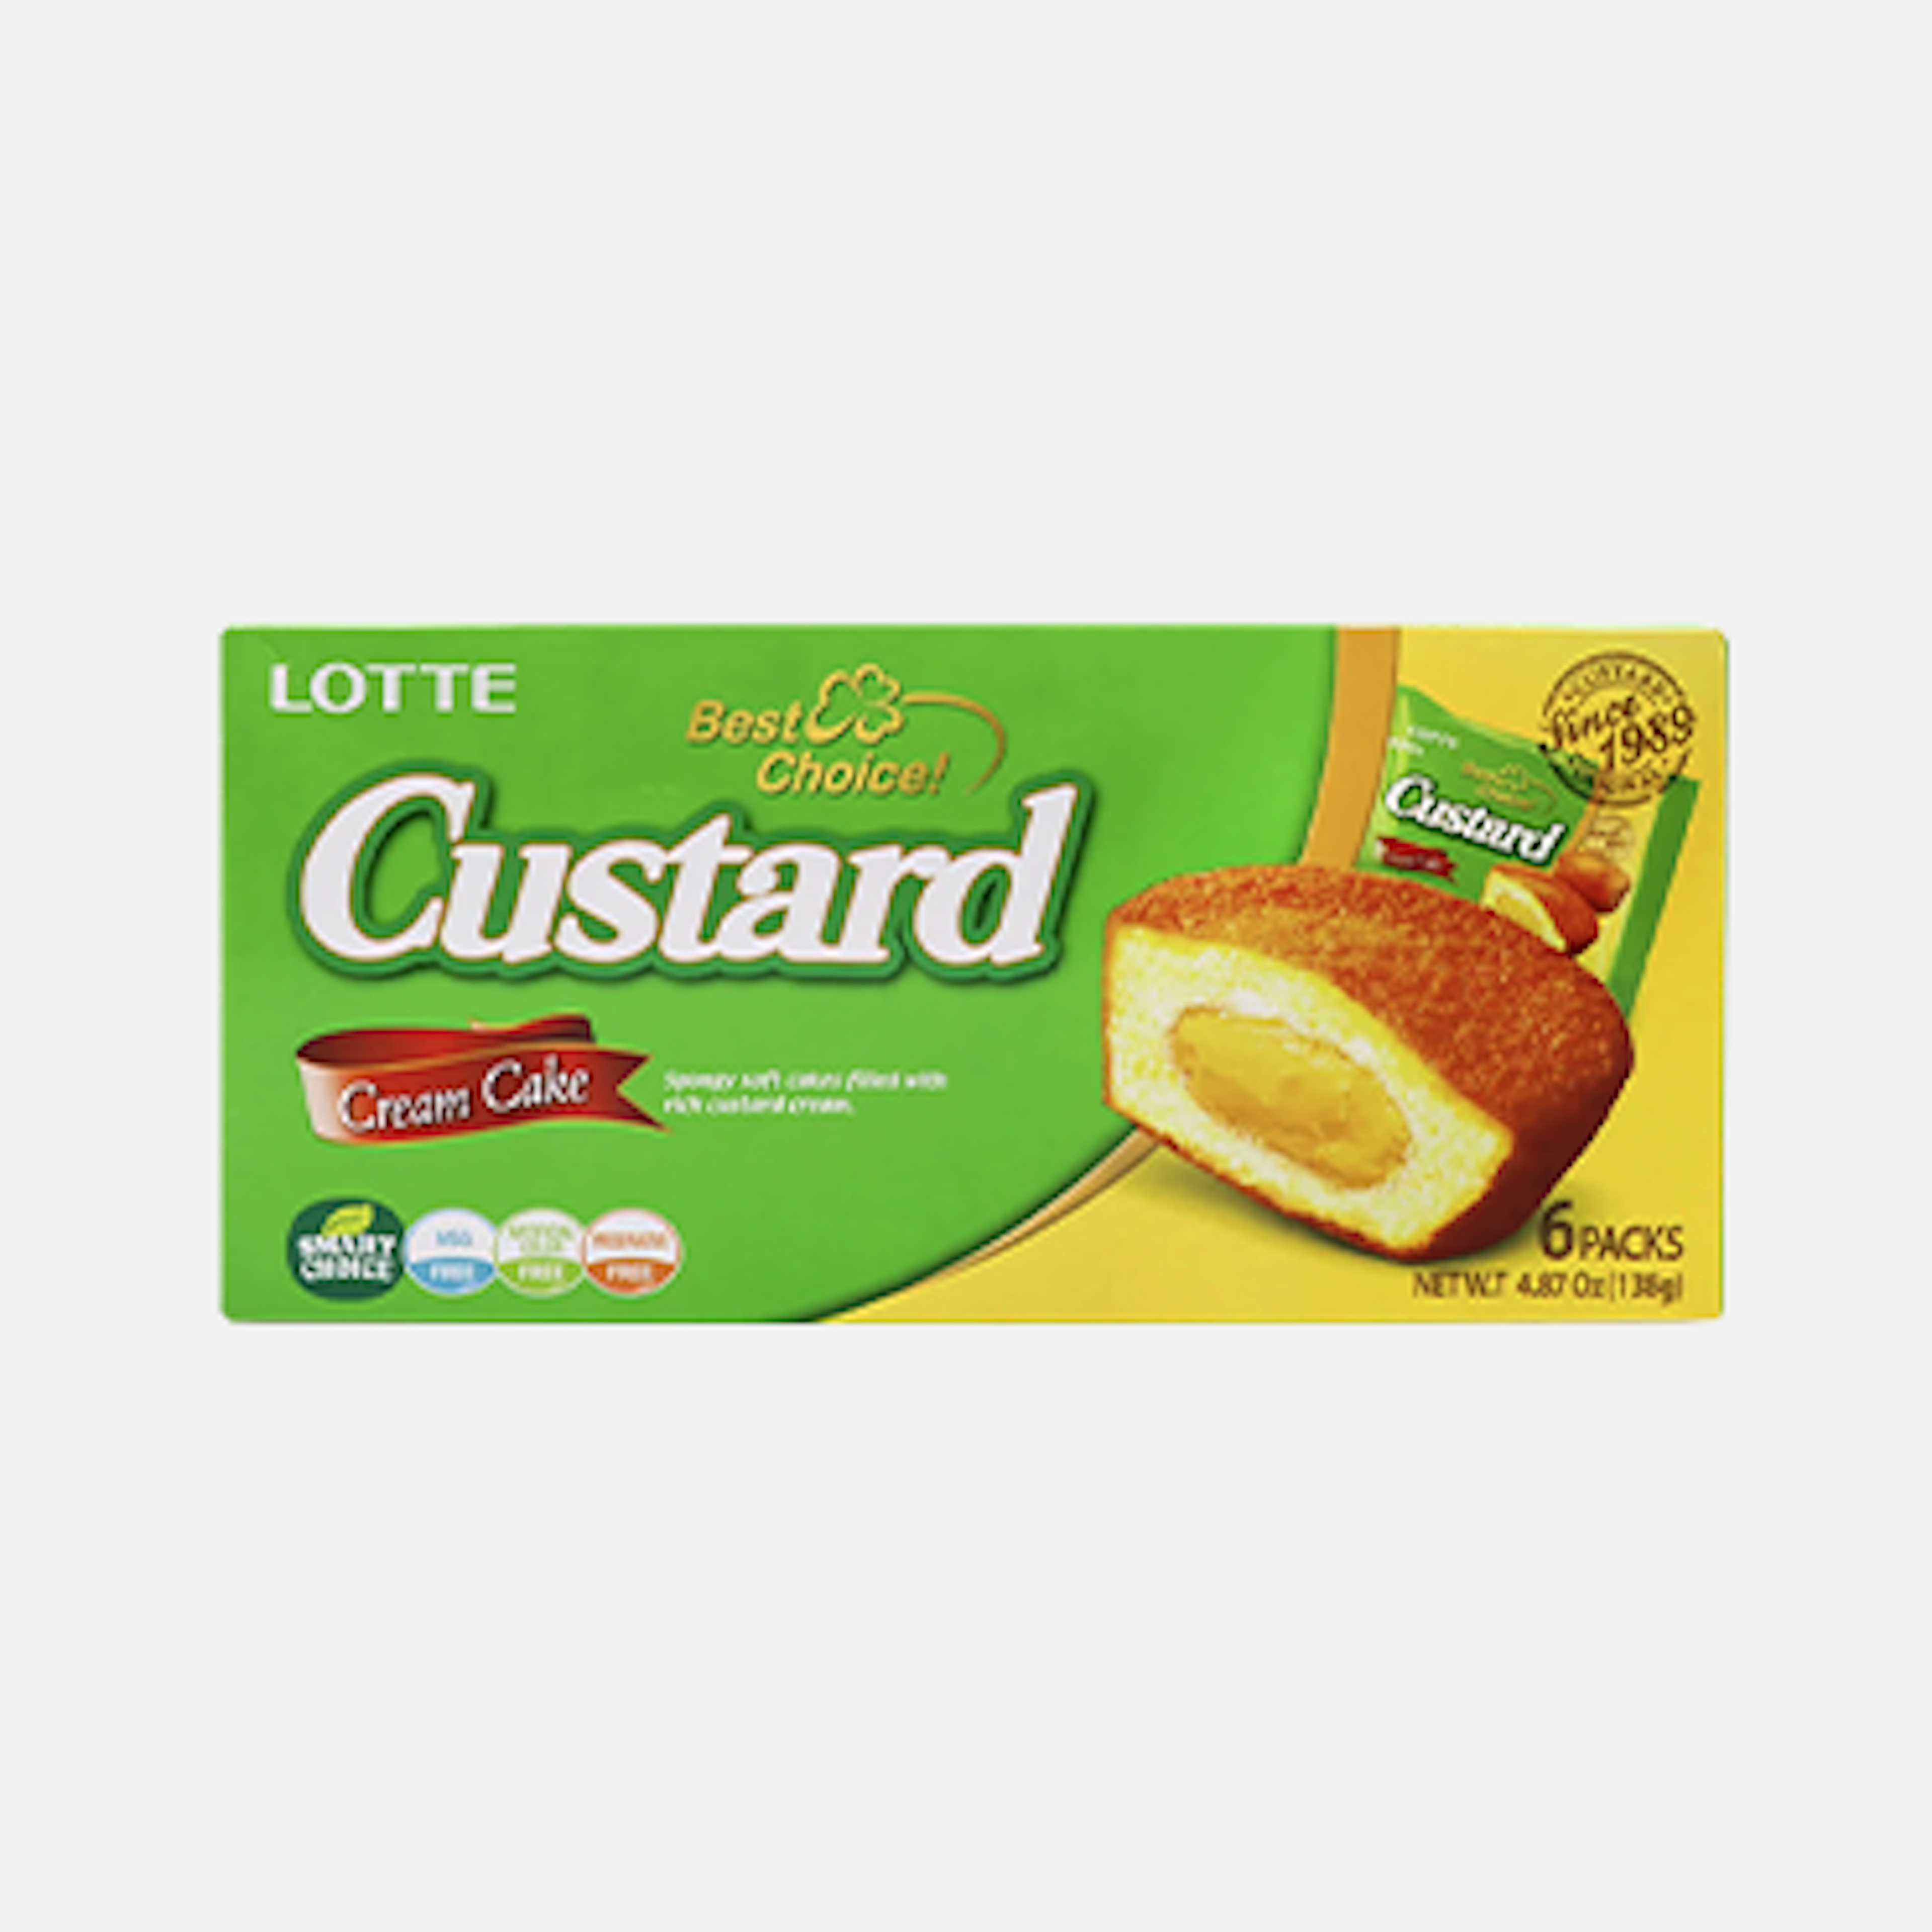 A pack of Lotte Custard Cream Cake Snack 138g showing the individually wrapped cakes.